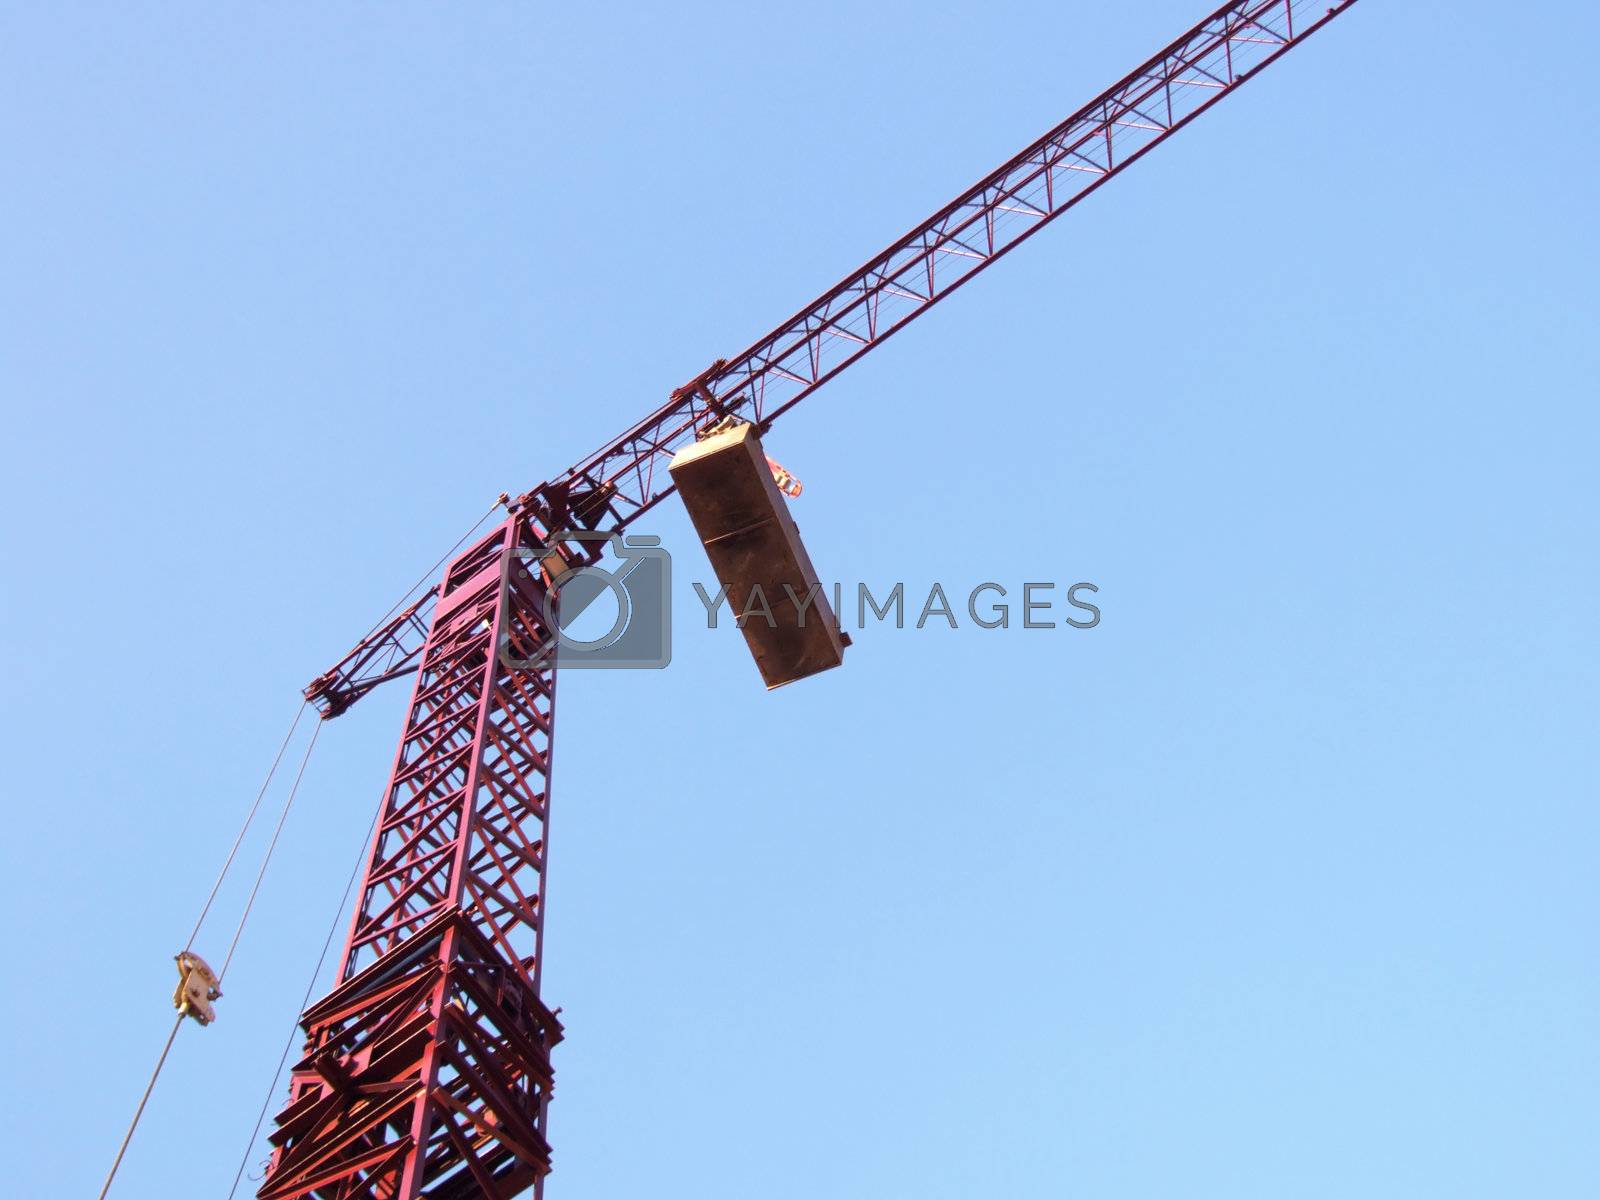 Royalty free image of Crane and construction by PauloResende